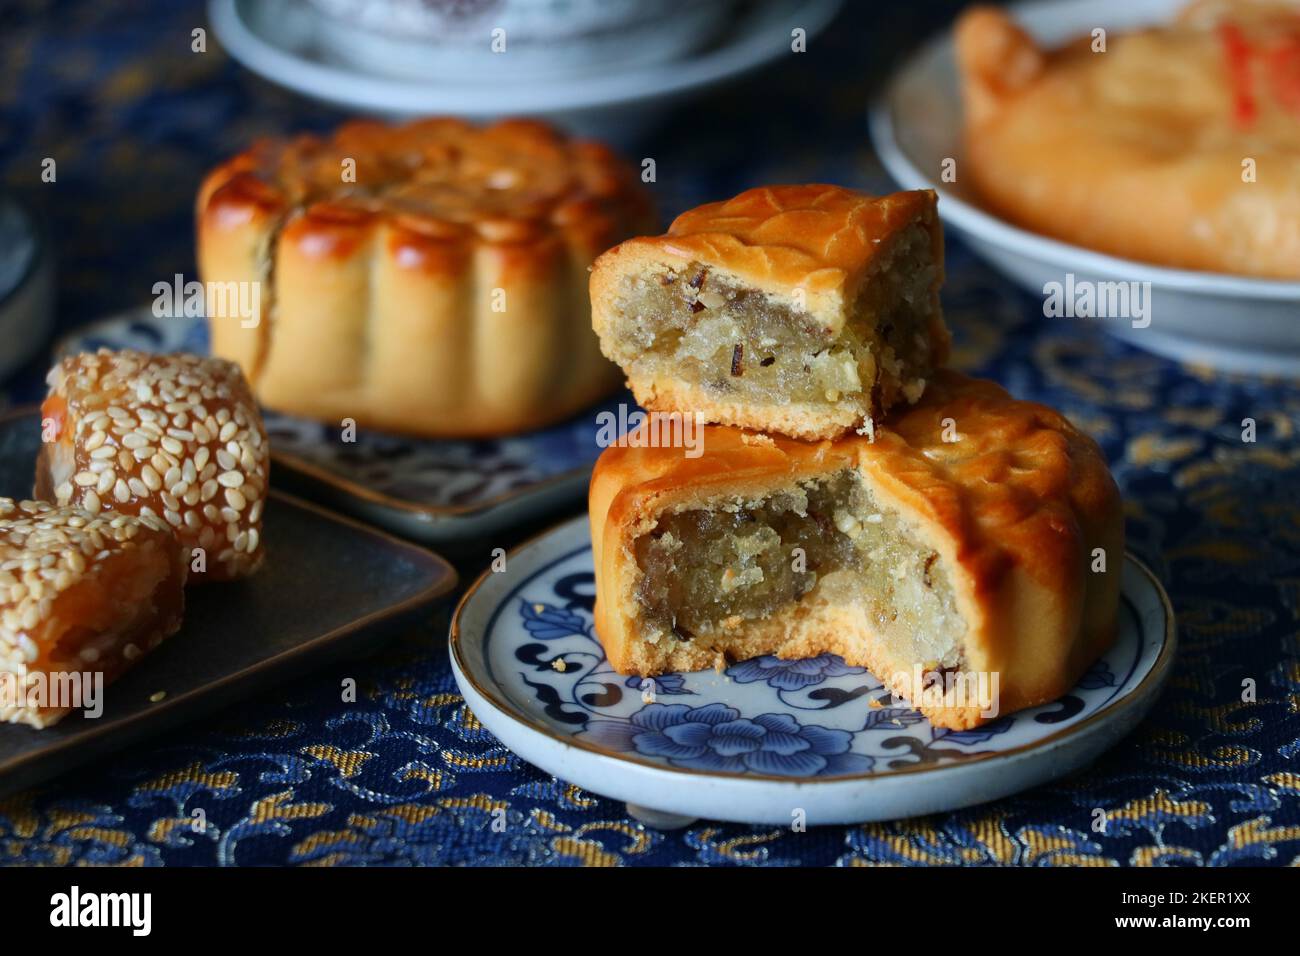 Teo chew style (Chinese southern in Guang Dong province) dessert for teatime called Tea liao in Teo chew language Stock Photo